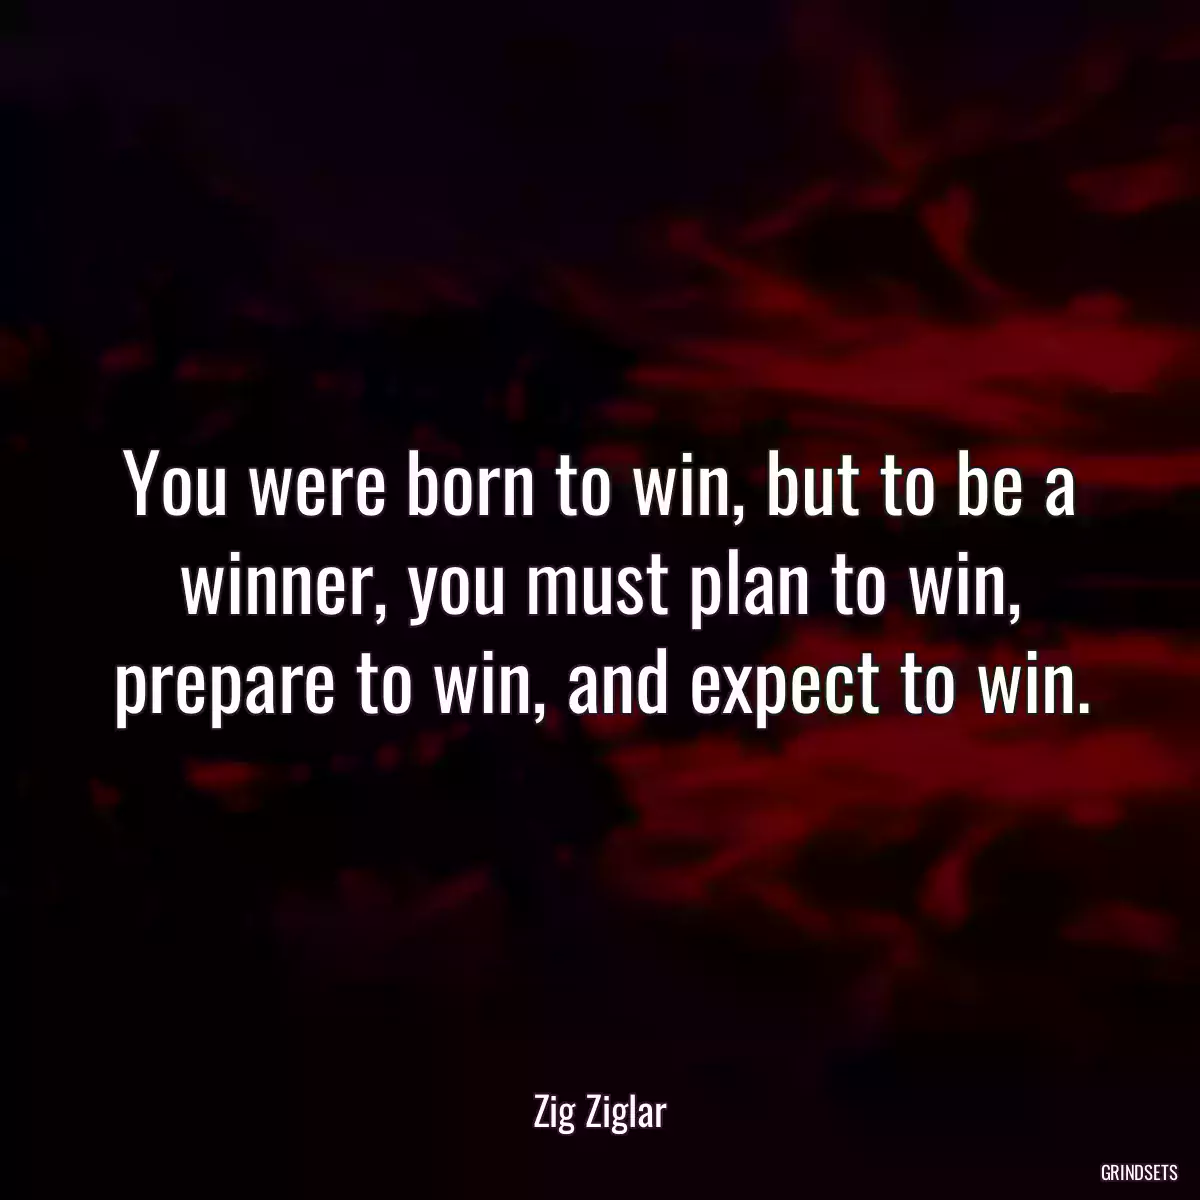 You were born to win, but to be a winner, you must plan to win, prepare to win, and expect to win.